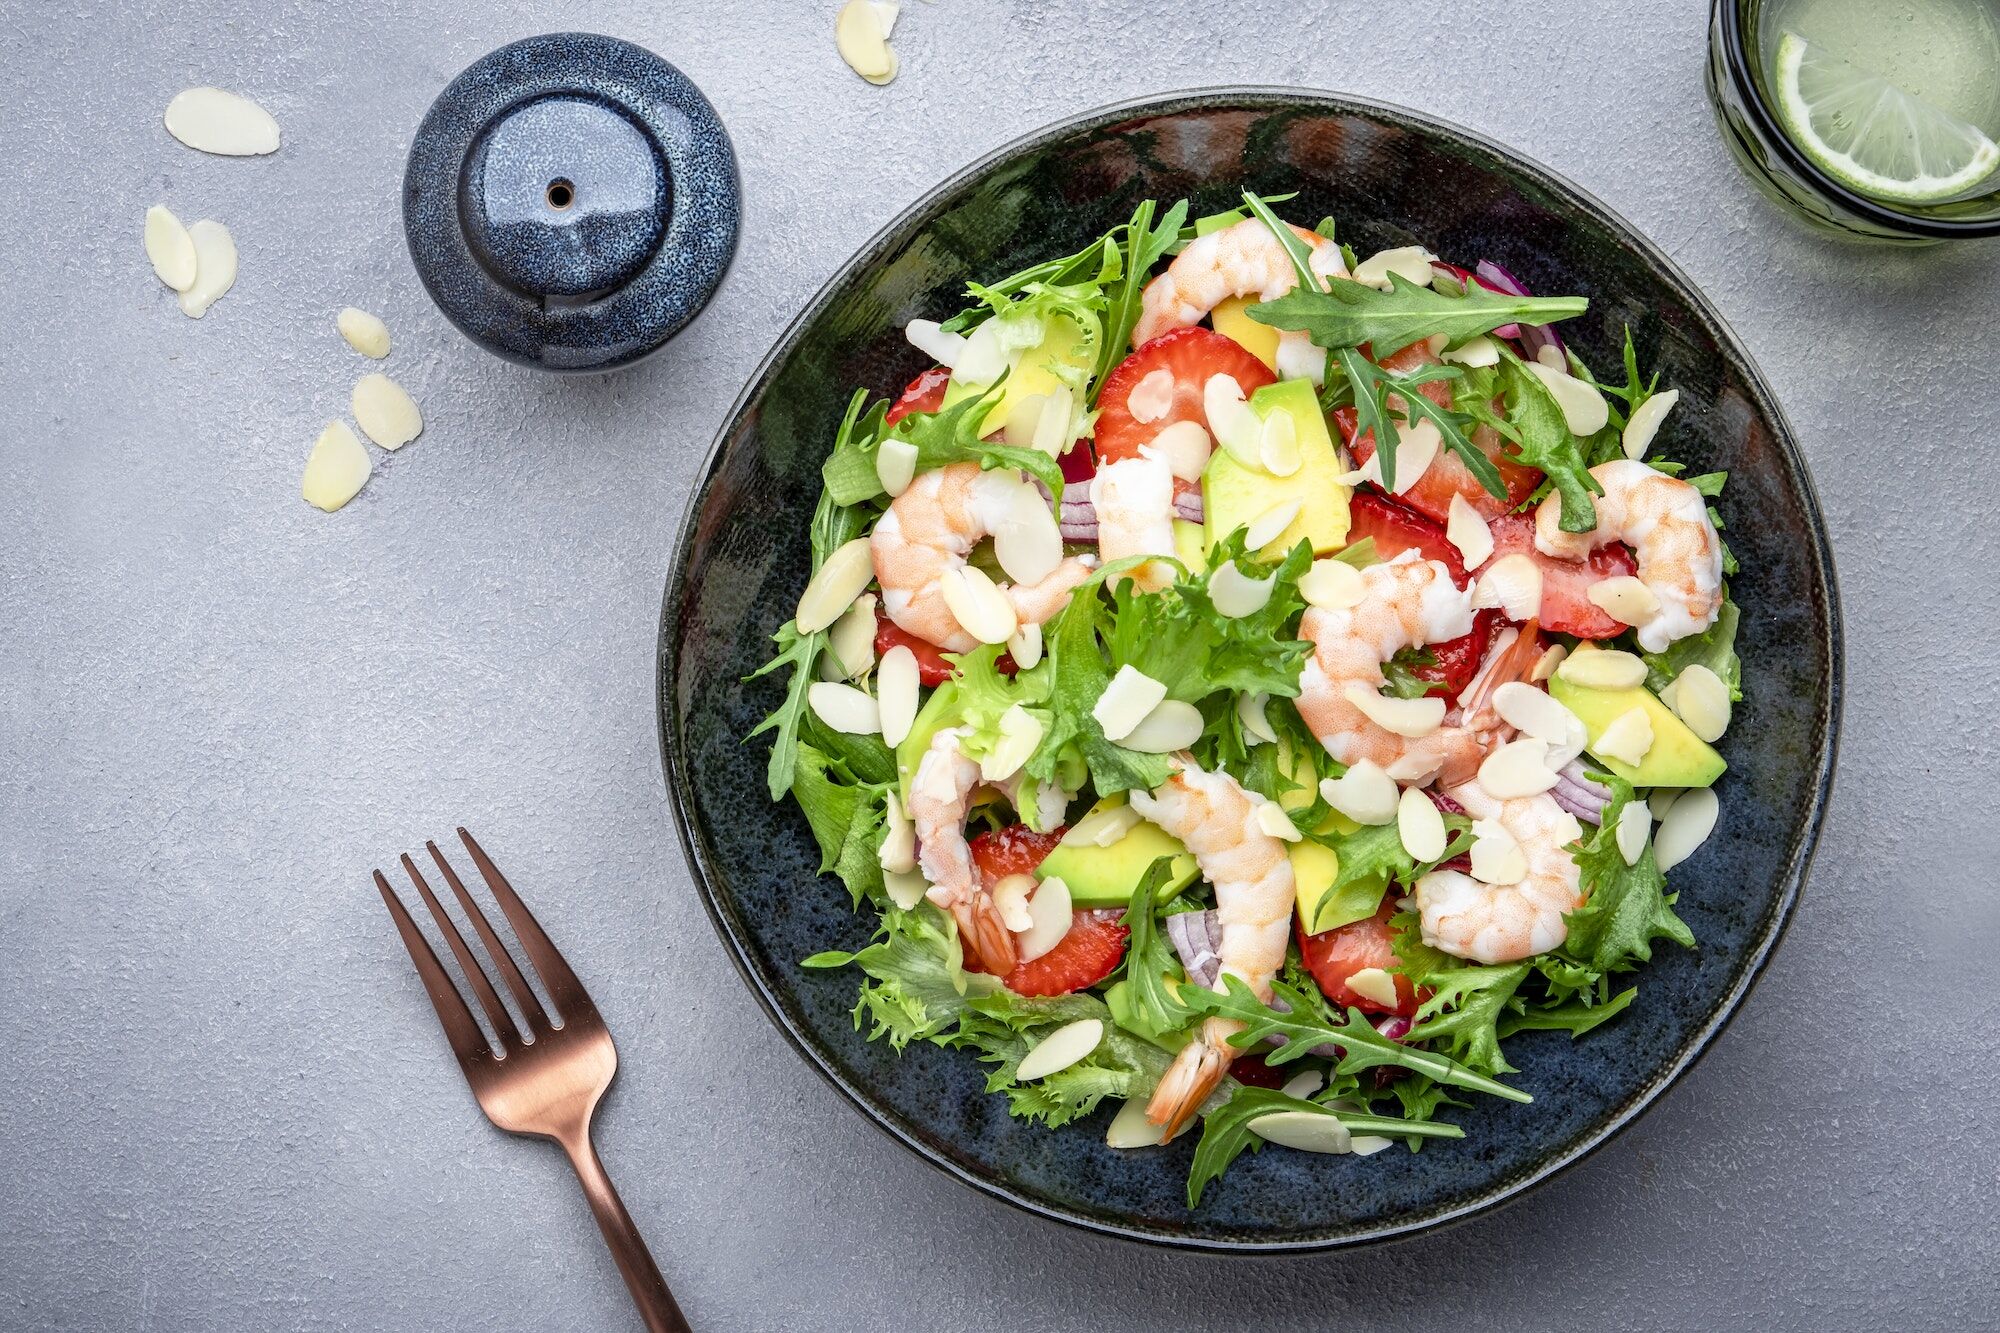 Strawberry, shrimp and herbs healthy salad with arugula, avocado and almond